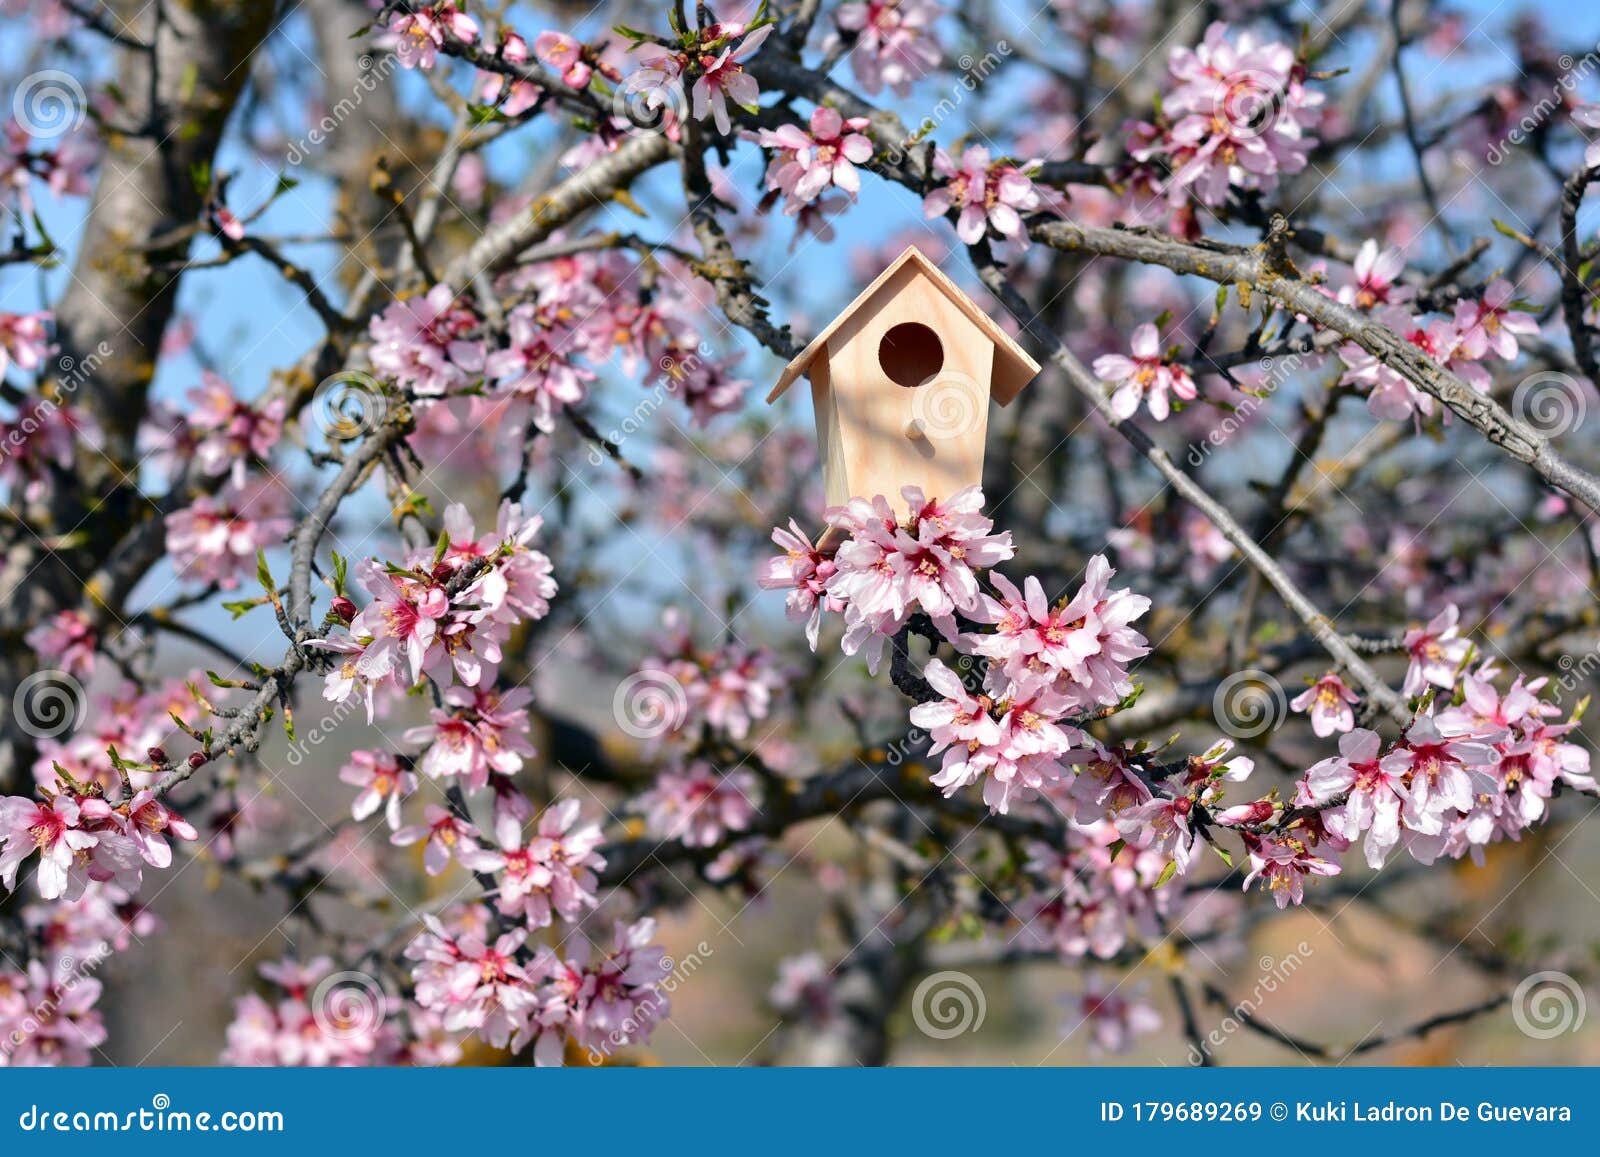 nest house, in a tree full of almond blossoms